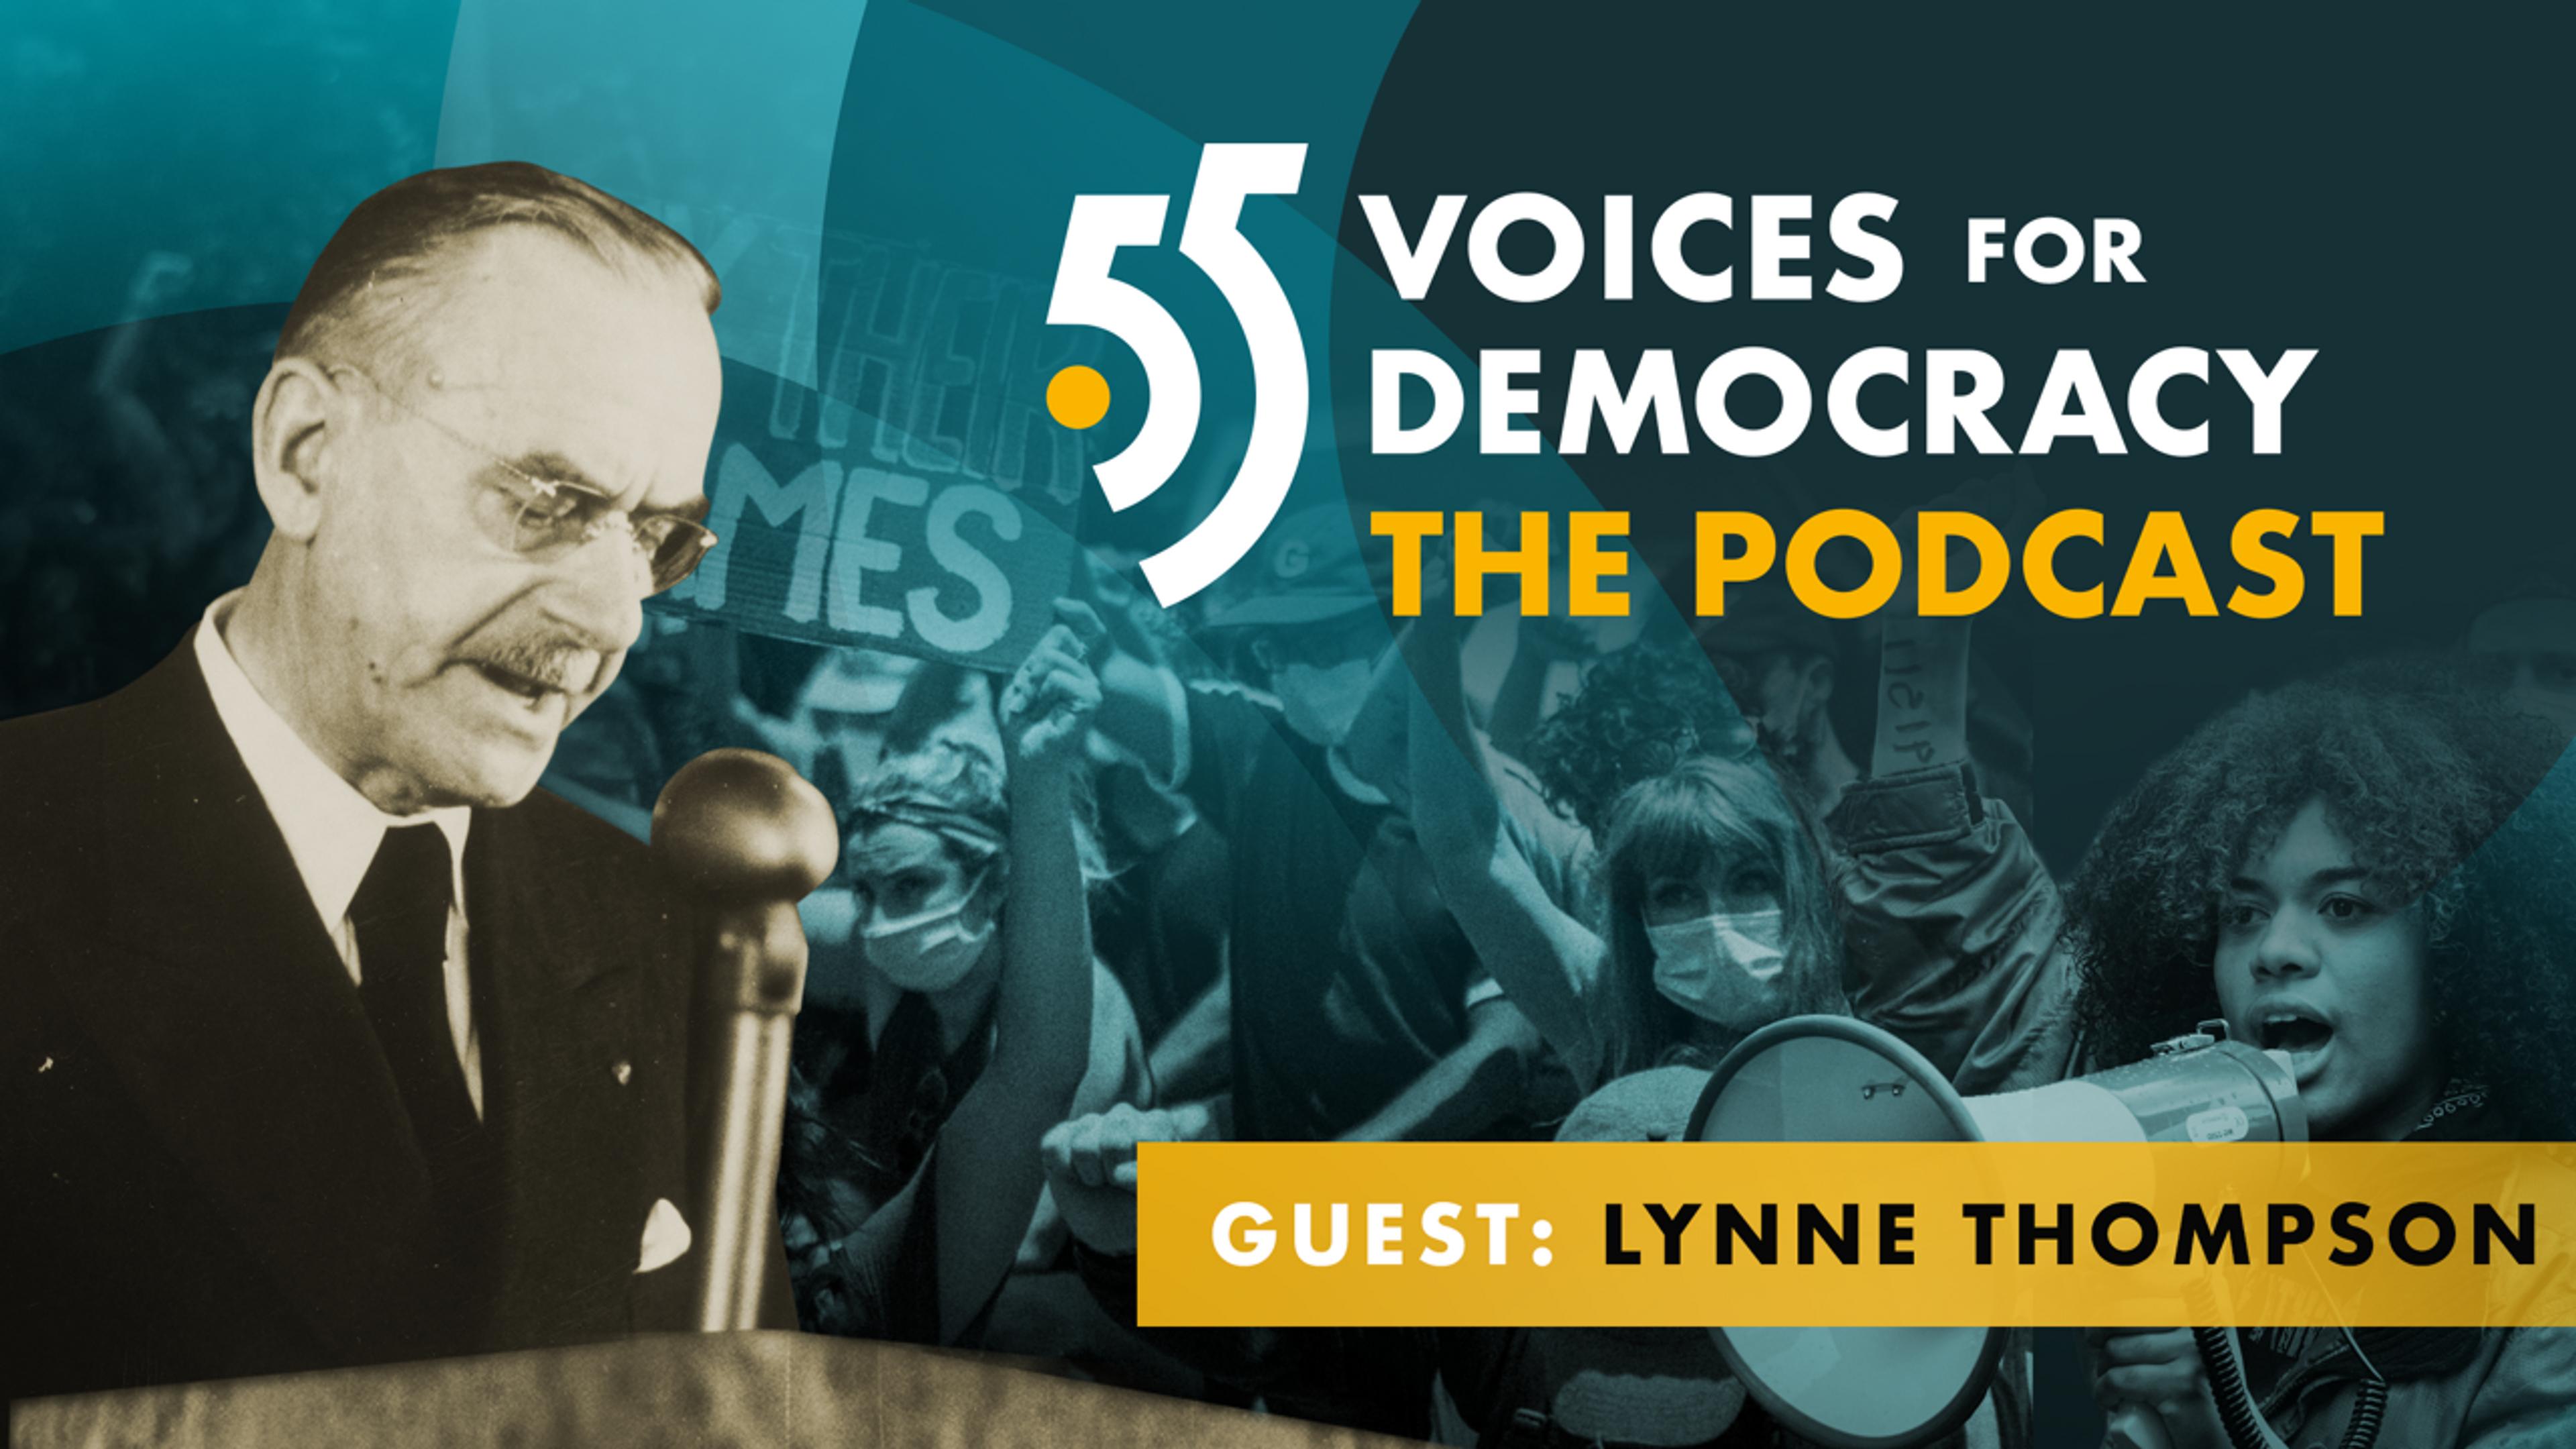 Lynne Thompson on the Role of Poetry in Democracies